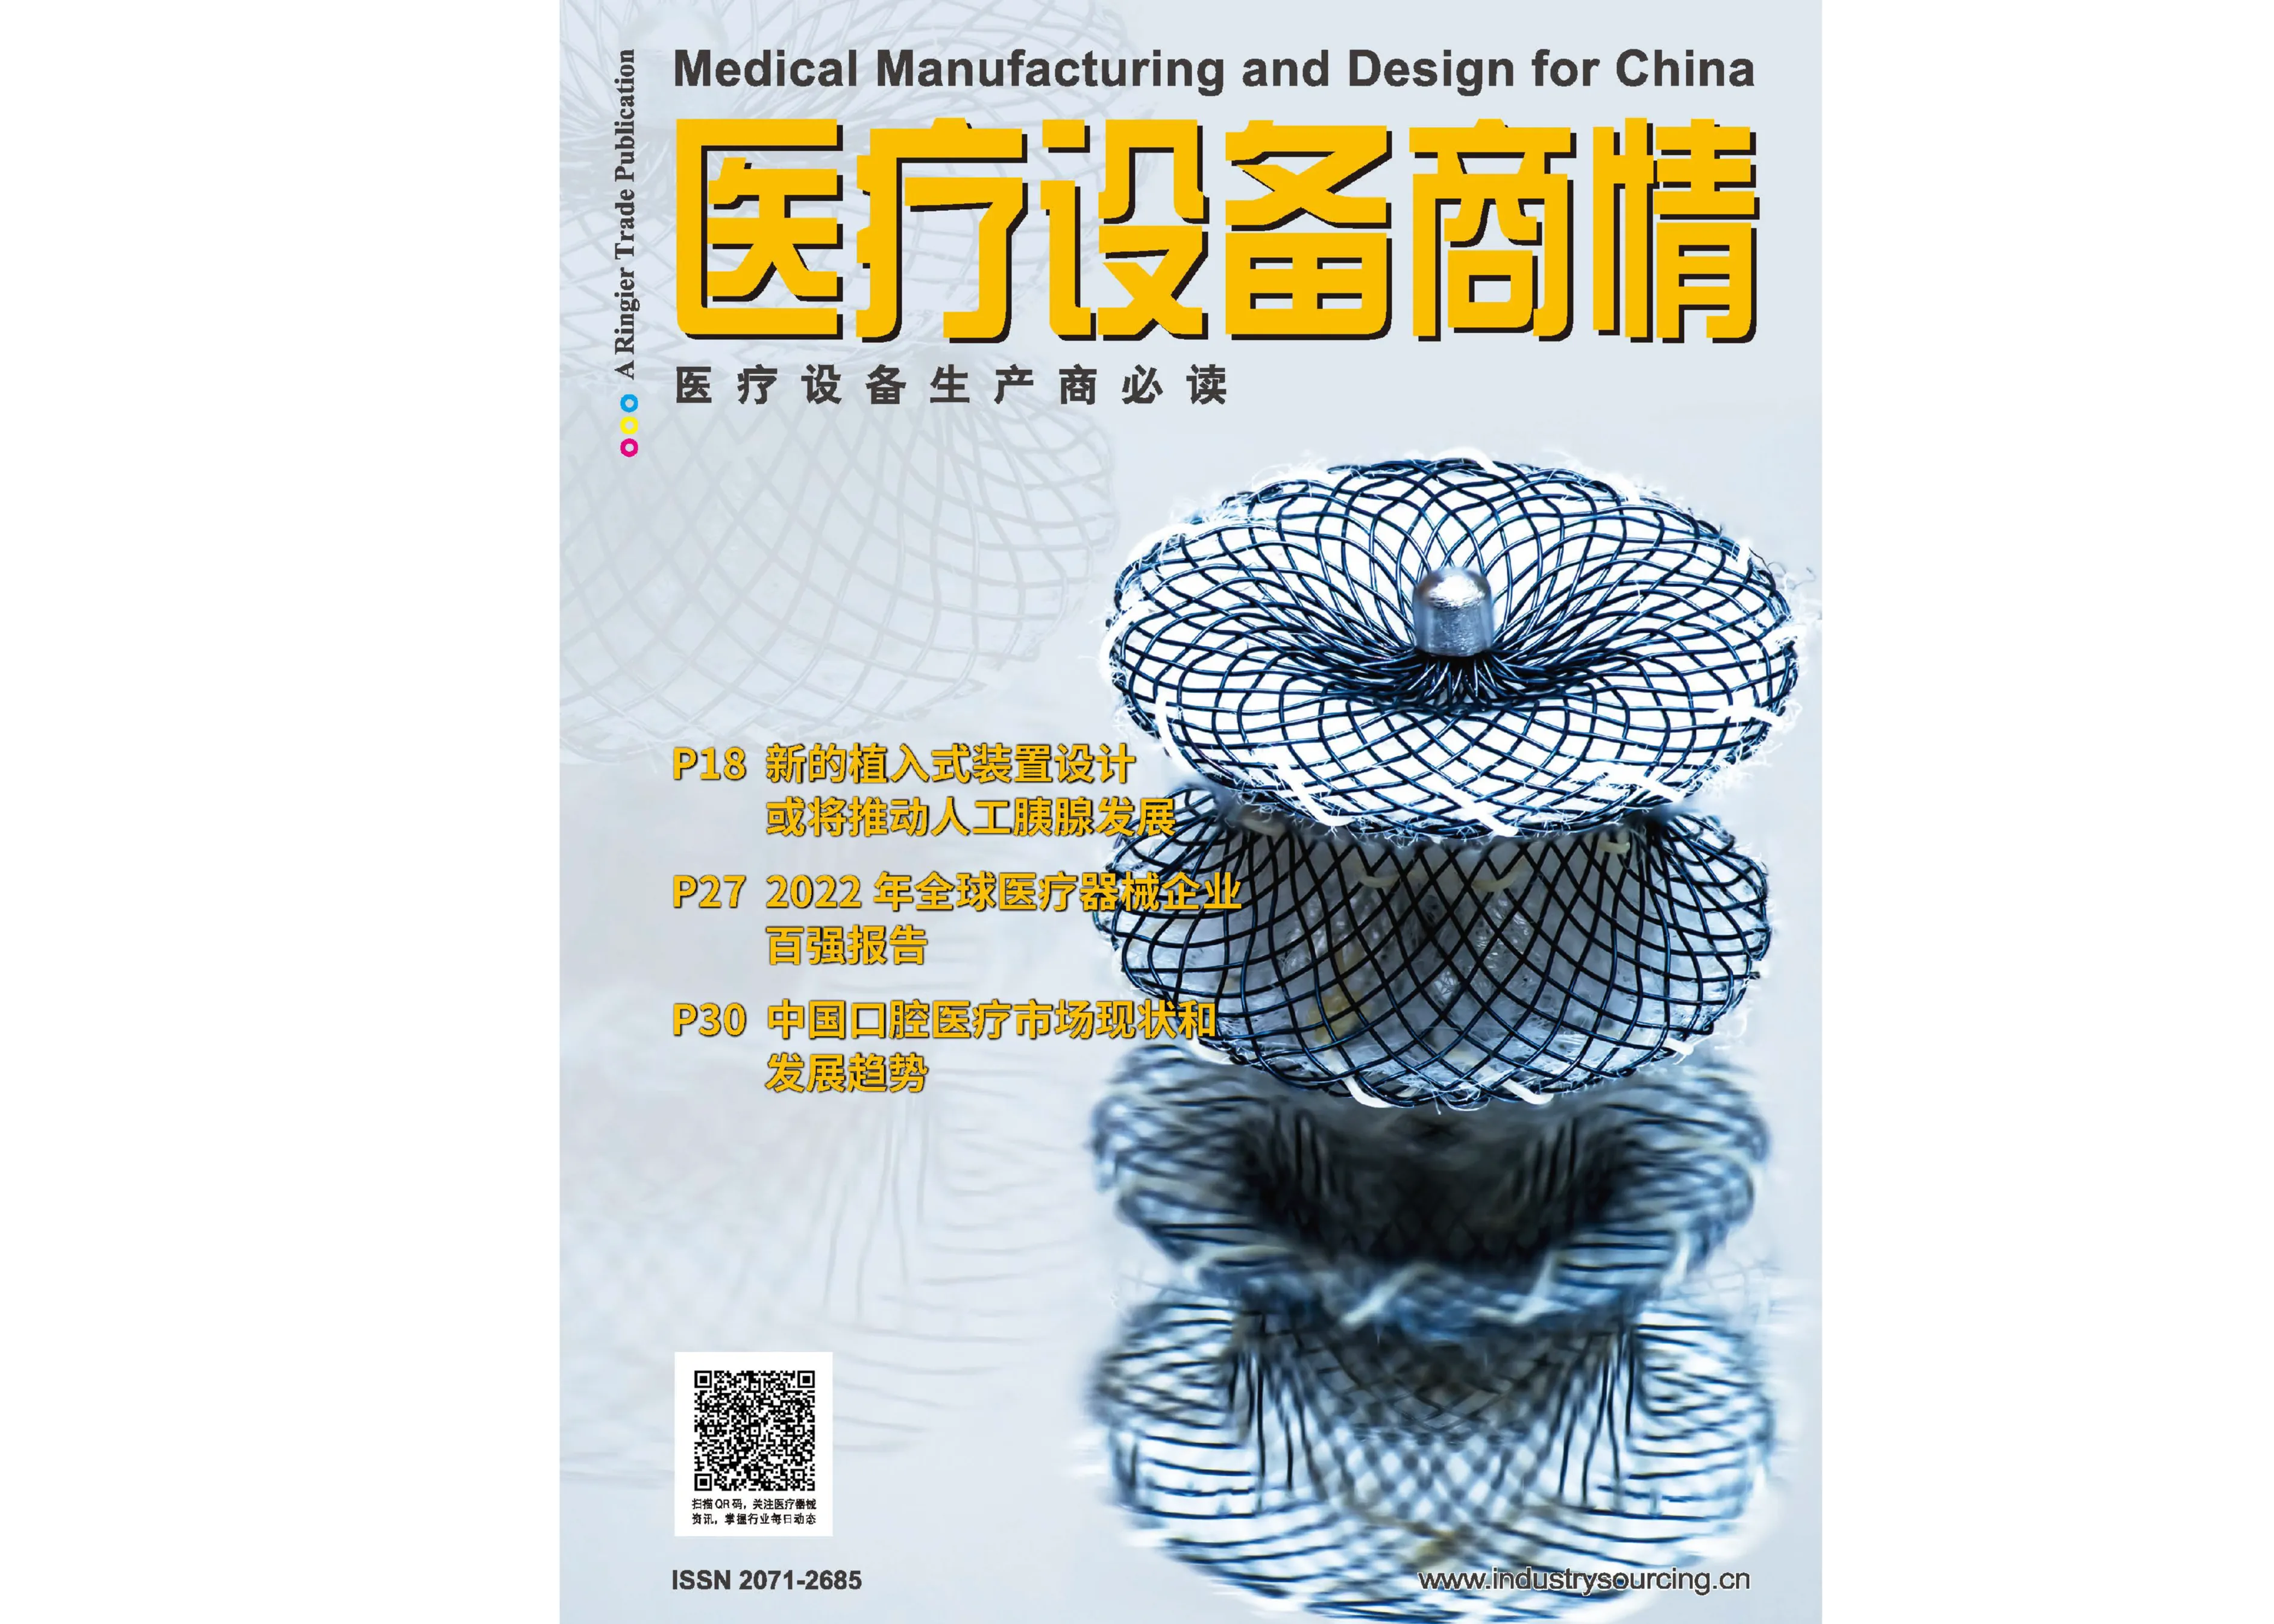 Medical Manufacturing & Design for China